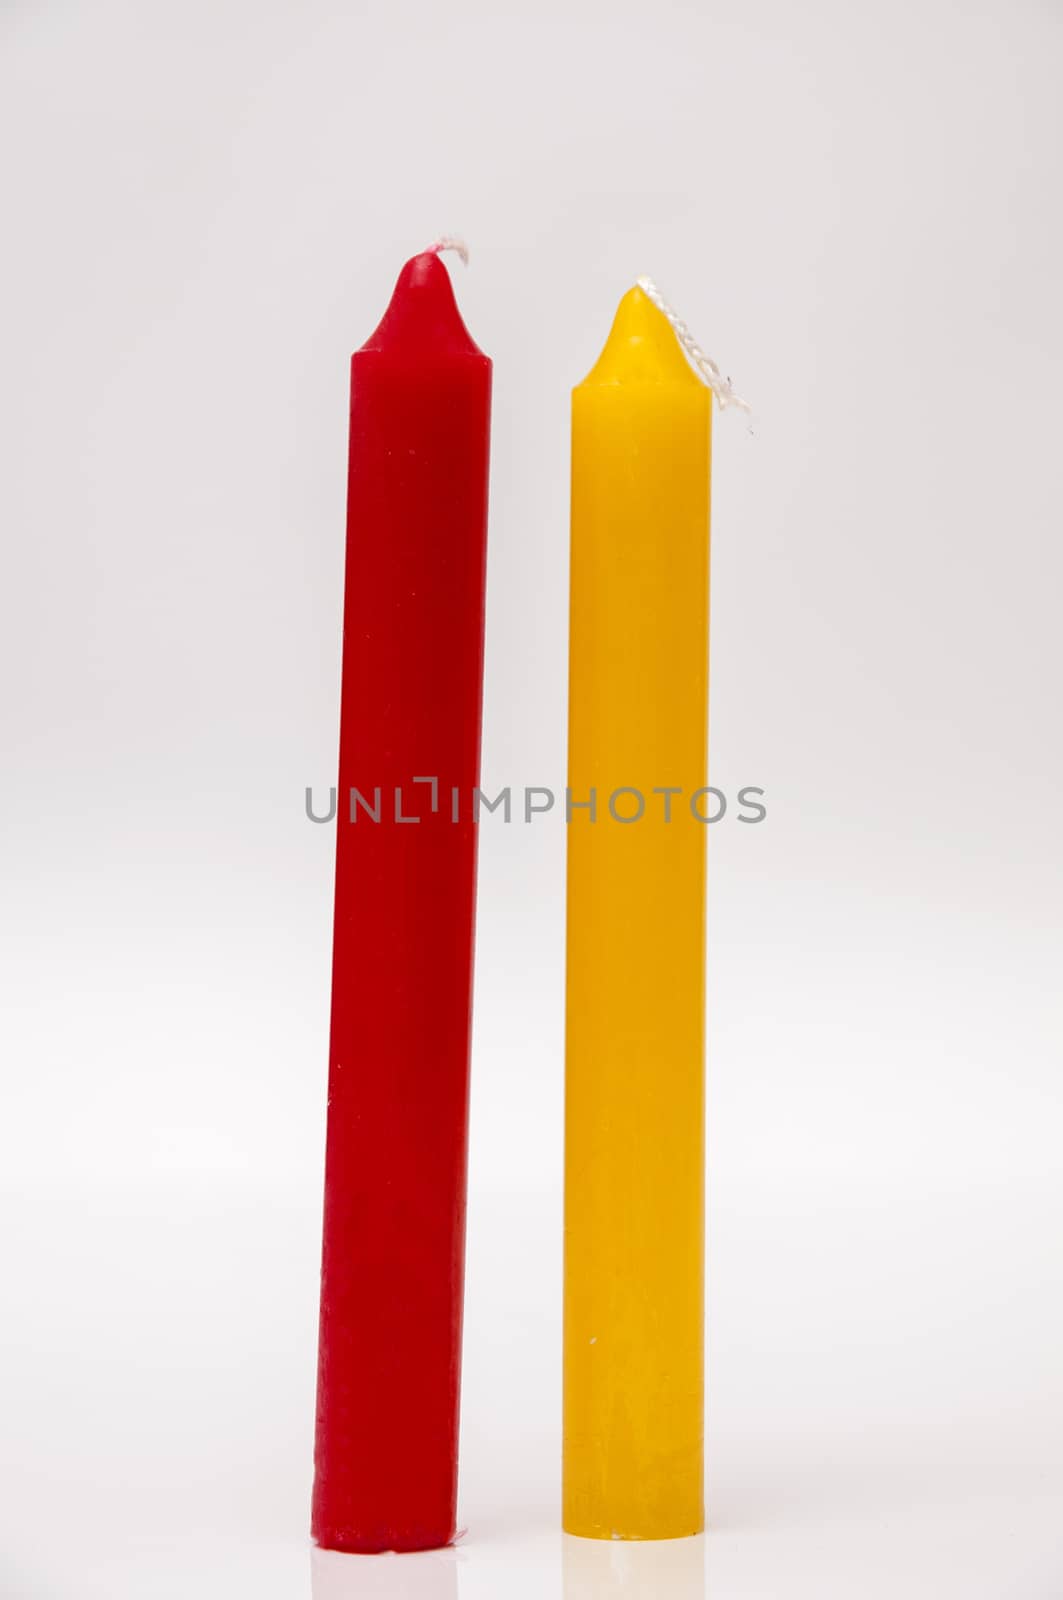 high colored candles to light this Christmas